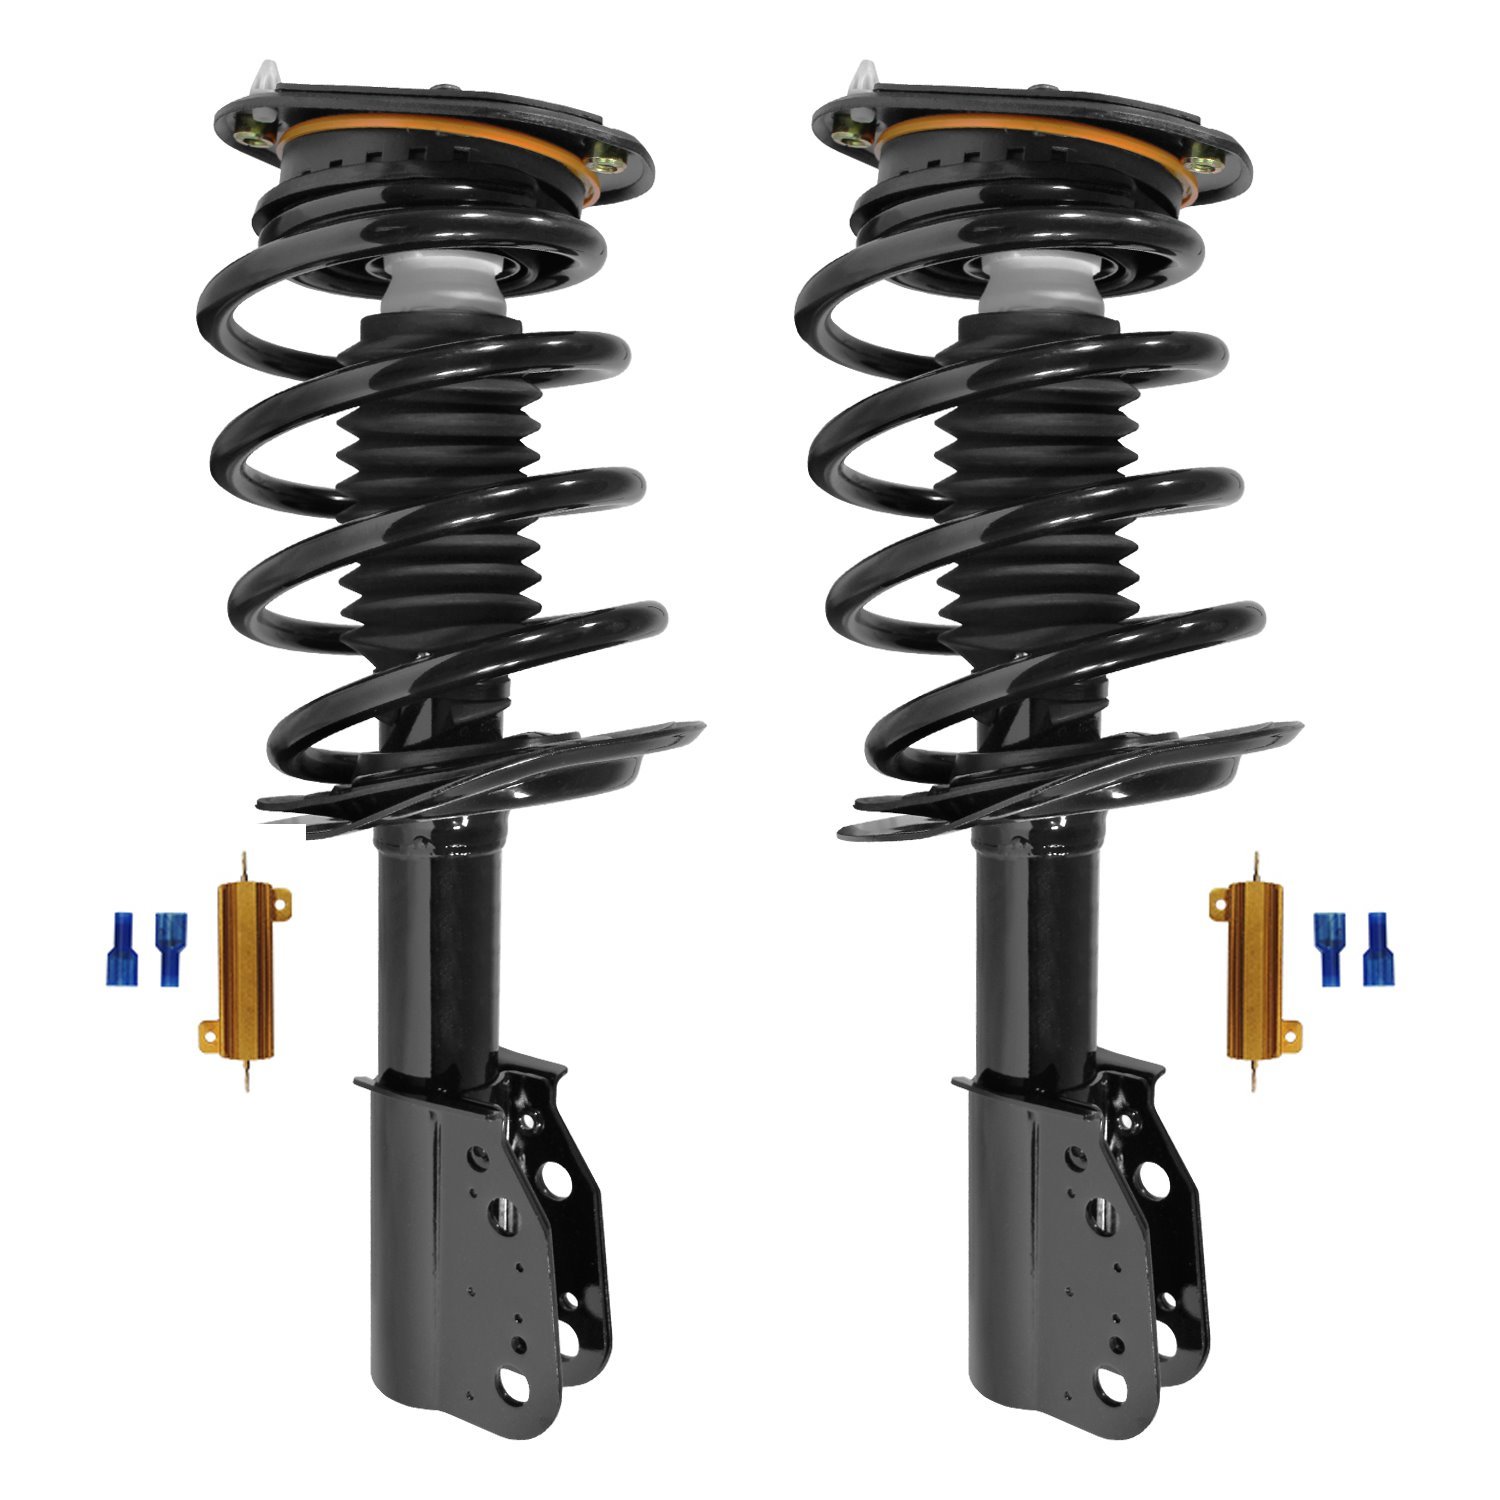 61700c Active To Passive Suspension Conversion Kit Fits Select Buick Lucerne, Cadillac DTS